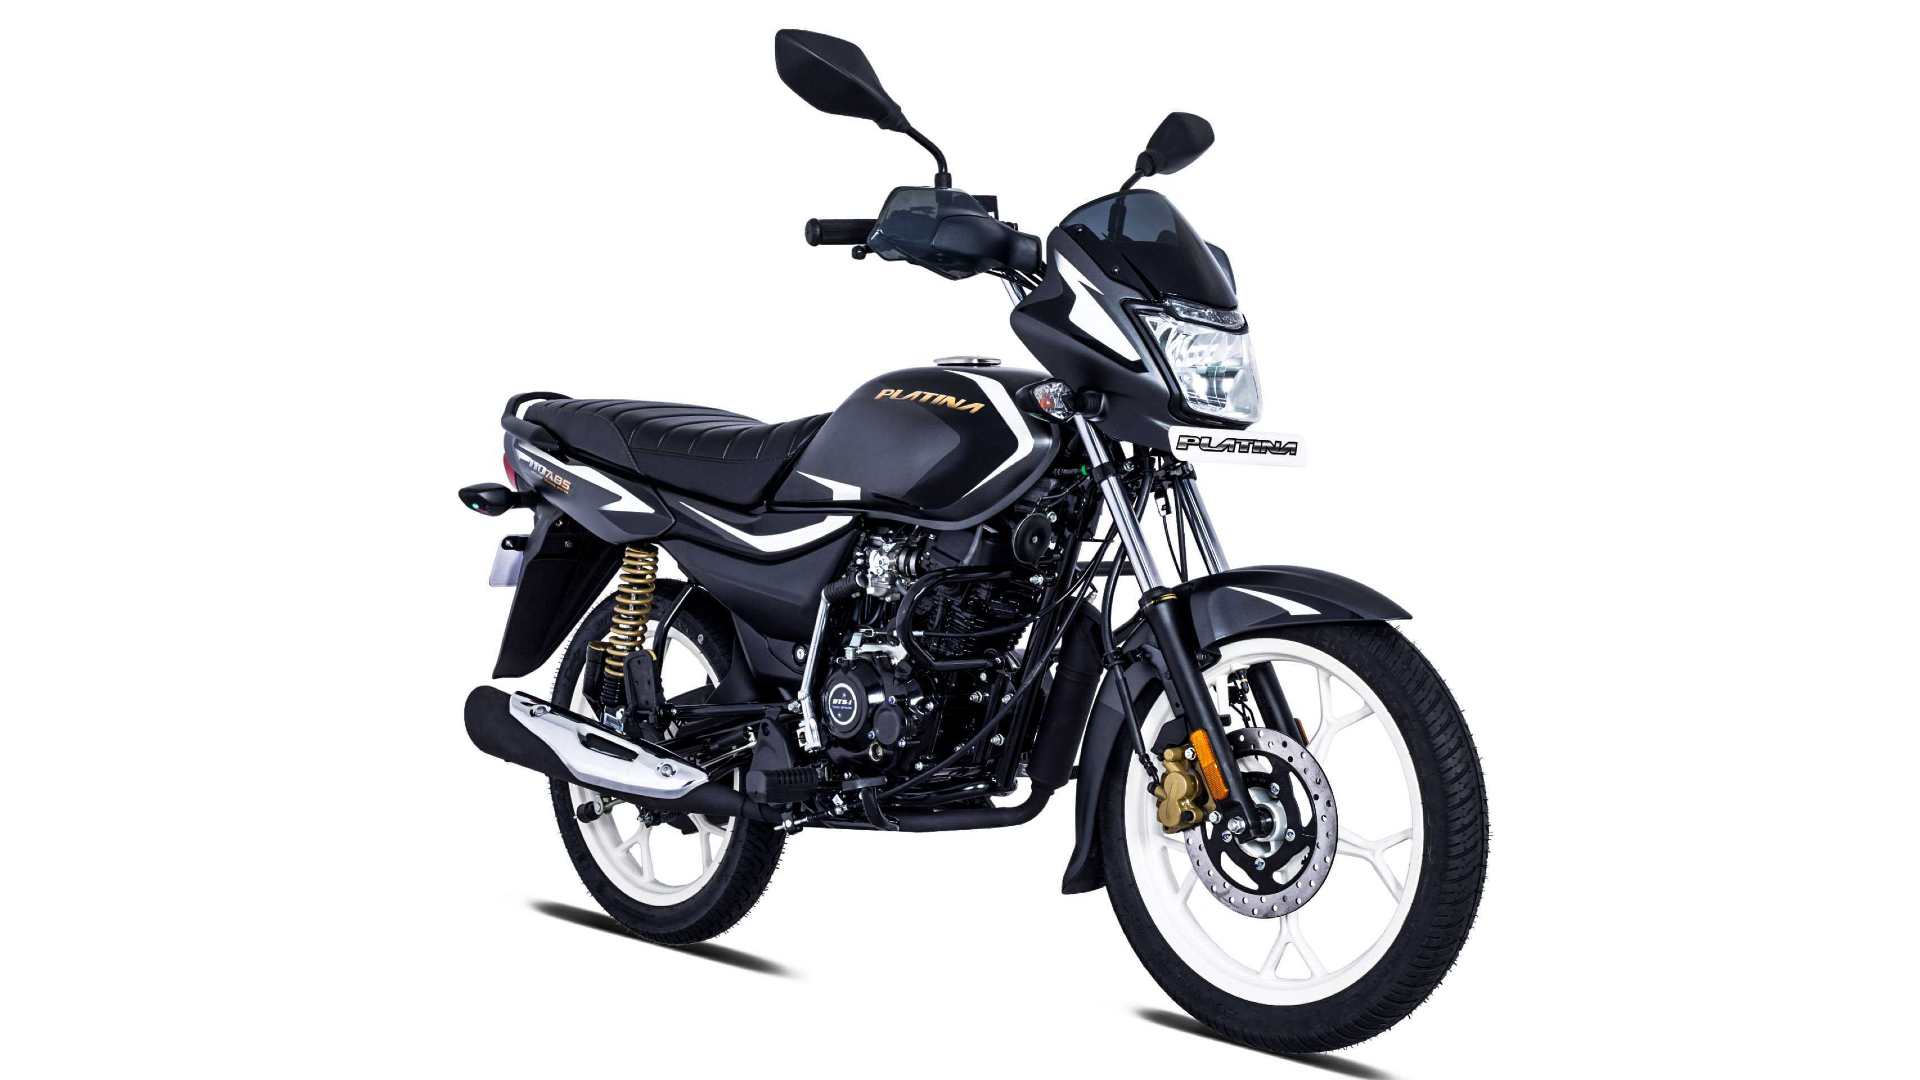 The Bajaj Platina 110 ABS features single-channel ABS, coupled with a 240mm front disc brake. Image: Bajaj